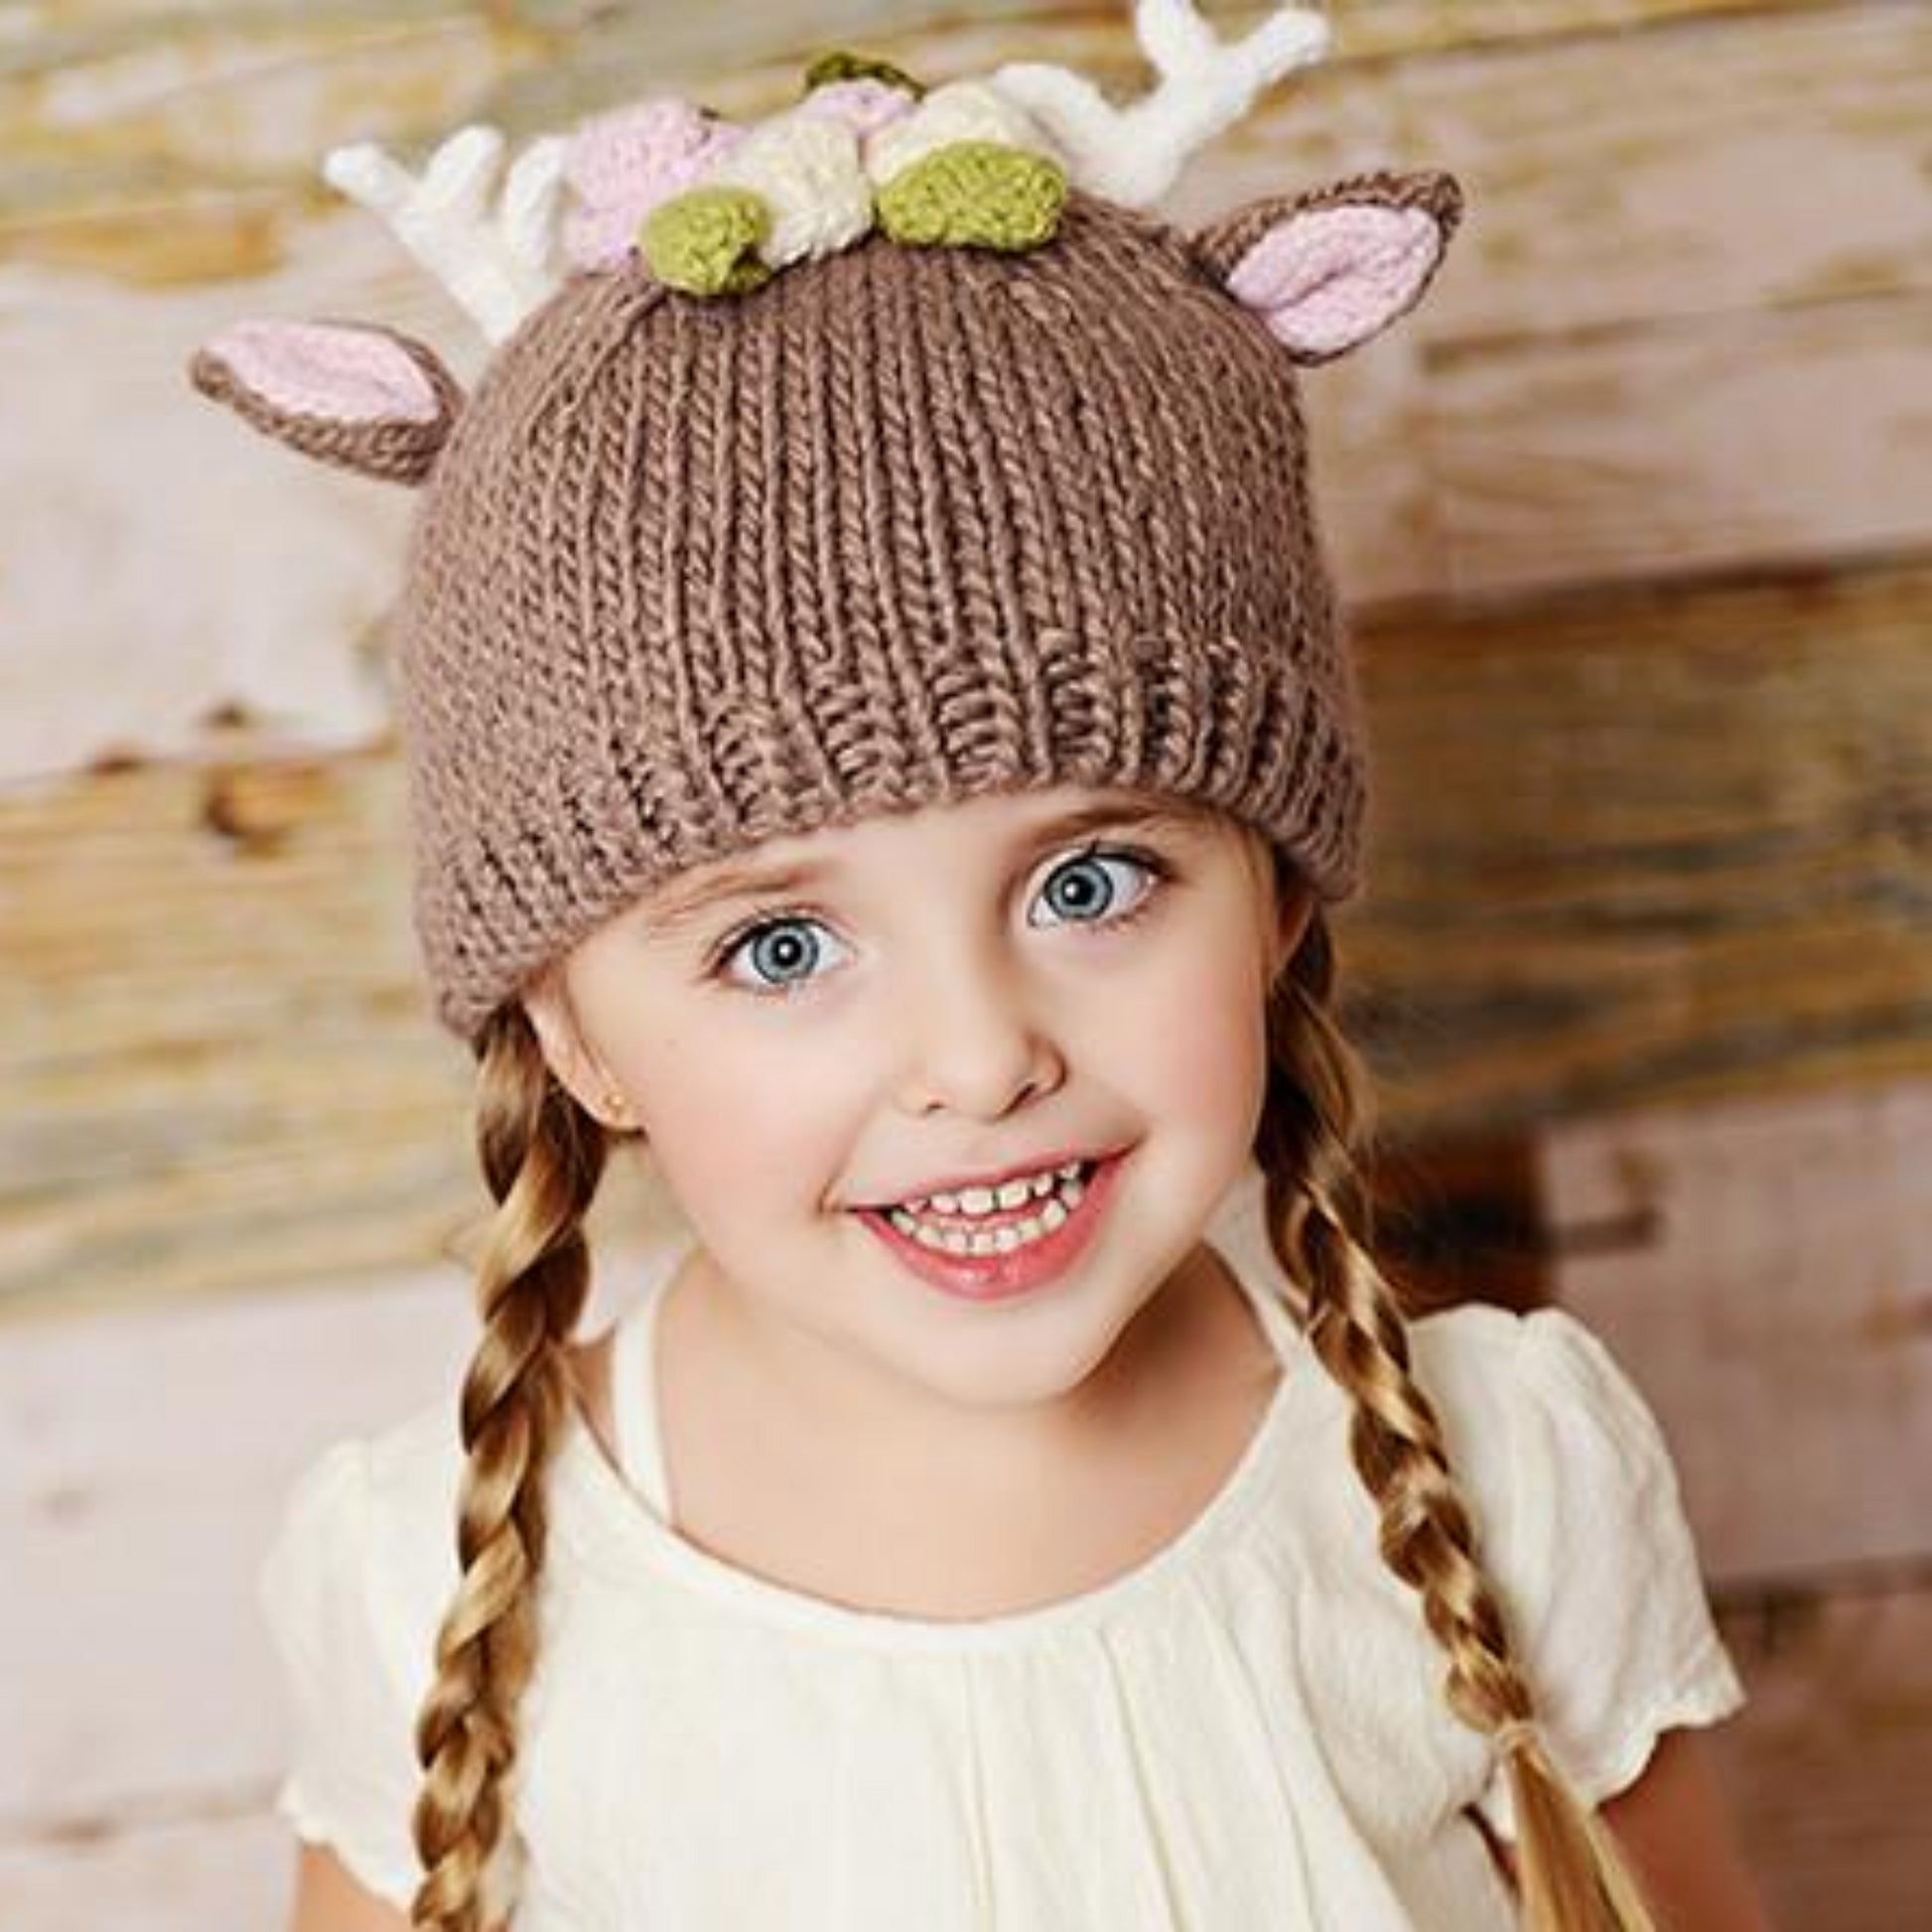 hand knit tan deer hat with pink ears and white antlers and flowers for baby infant toddler child christmas winter holiday